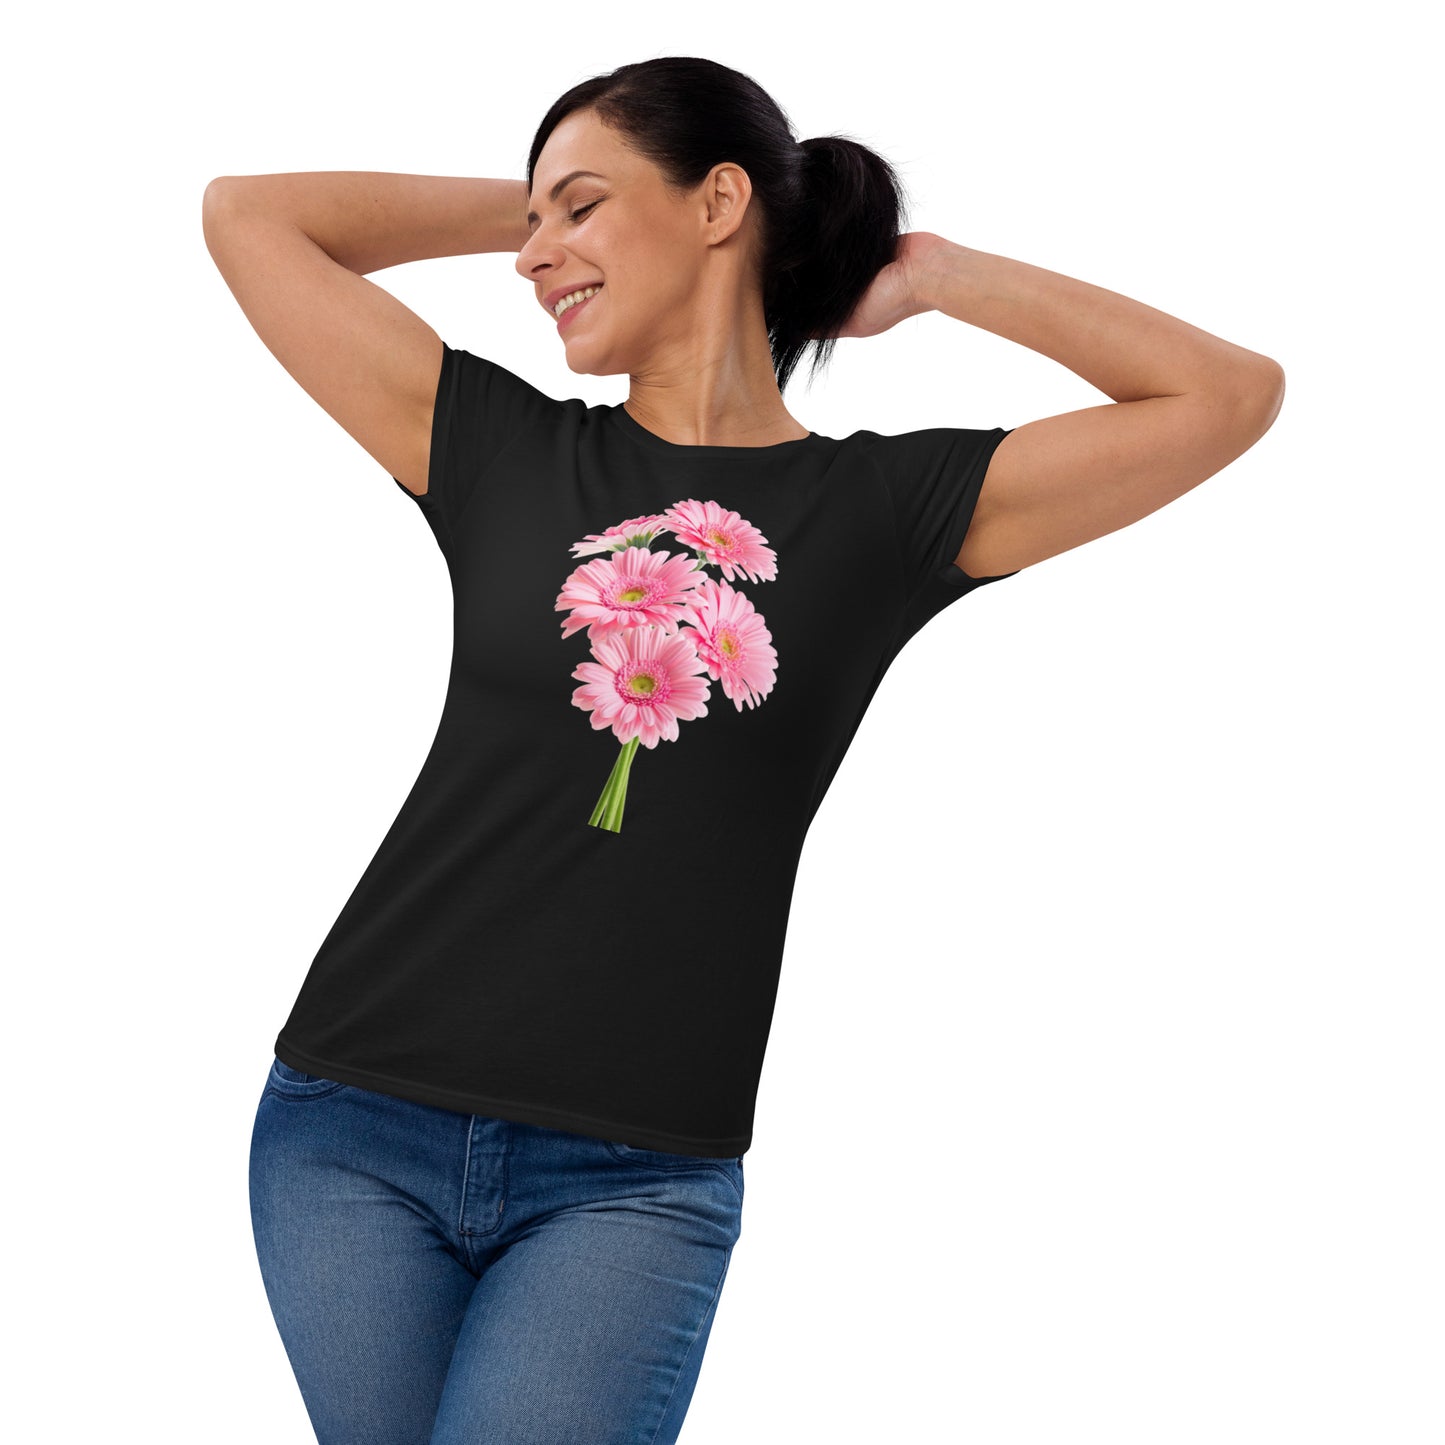 "Premium Women's Daisy-Printed Cotton T-Shirt with Short Sleeves - Exceptional Comfort and Durability"